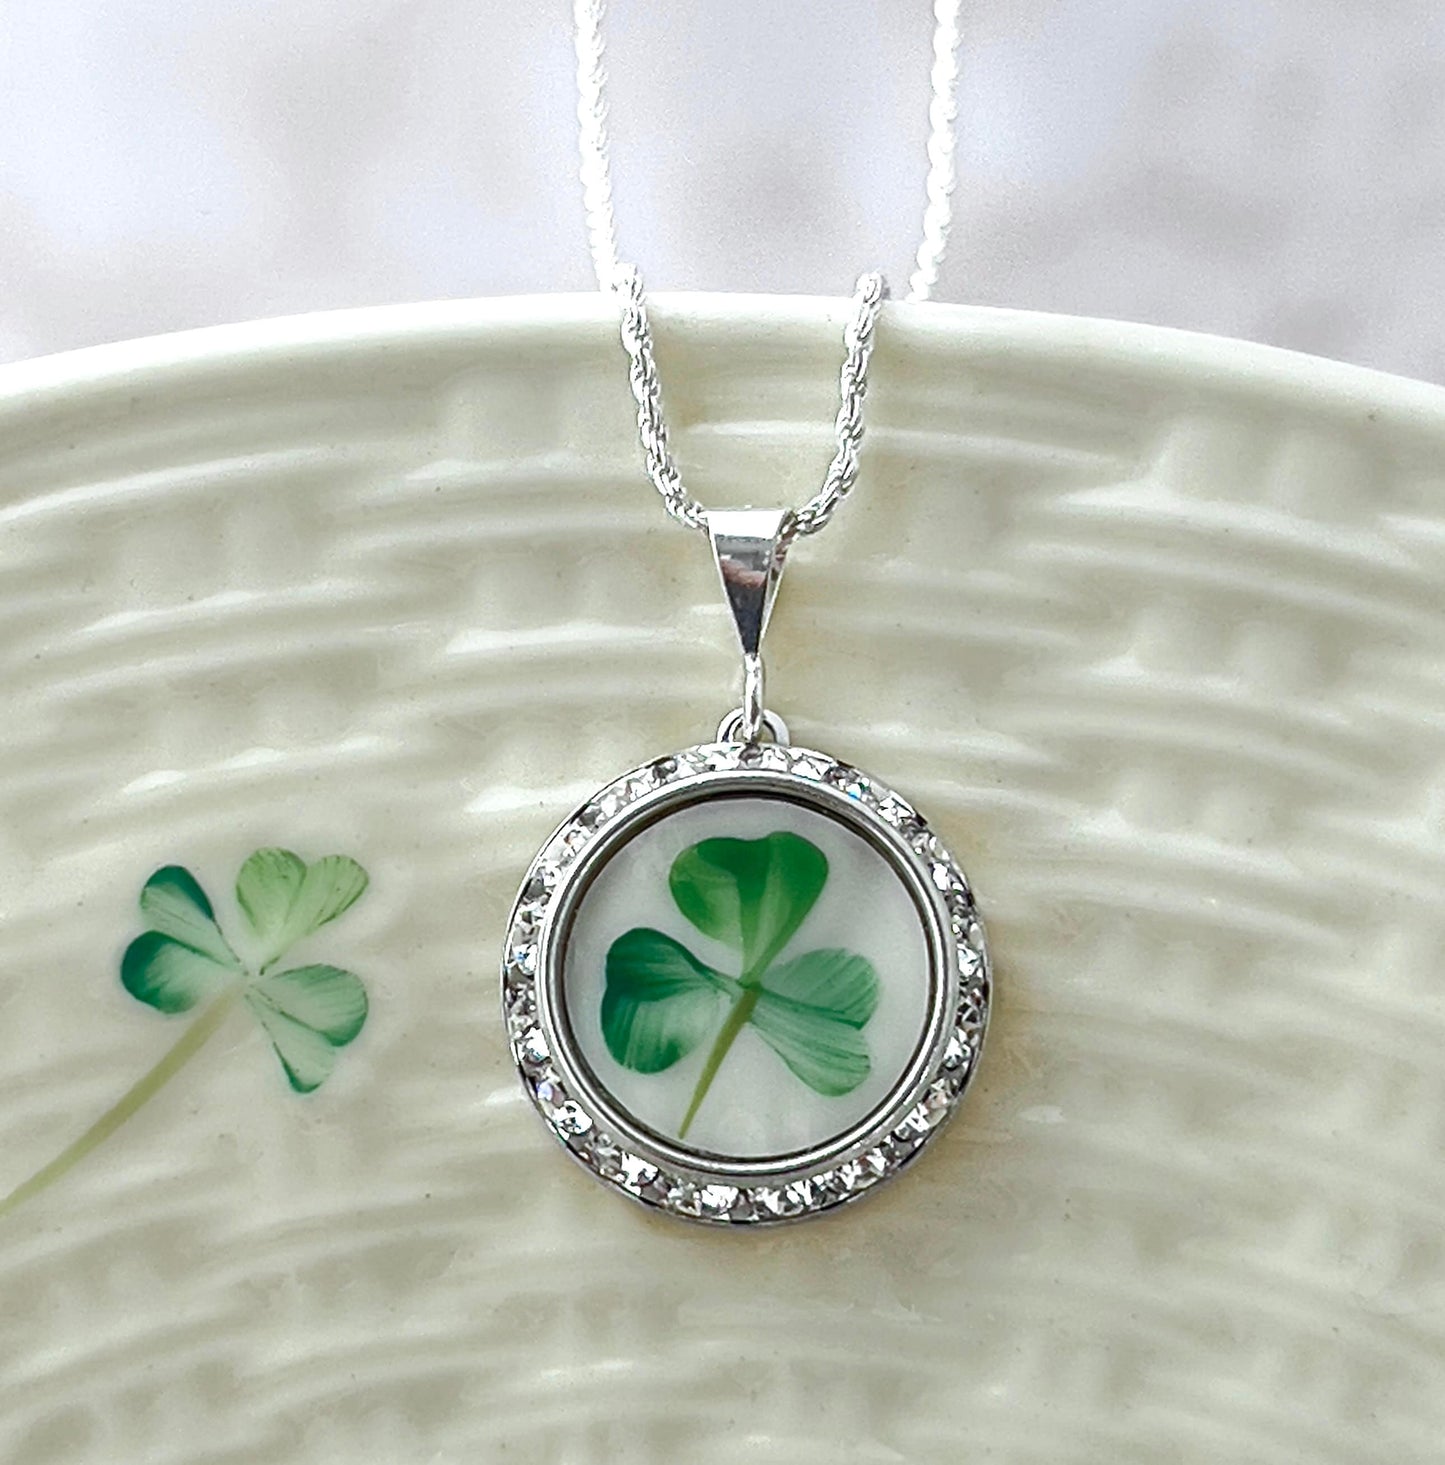 Celtic Shamrock Necklace, Belleek Broken China, Irish Jewelry, Crystal Necklace, Unique Gifts for Women, Gifts for Women